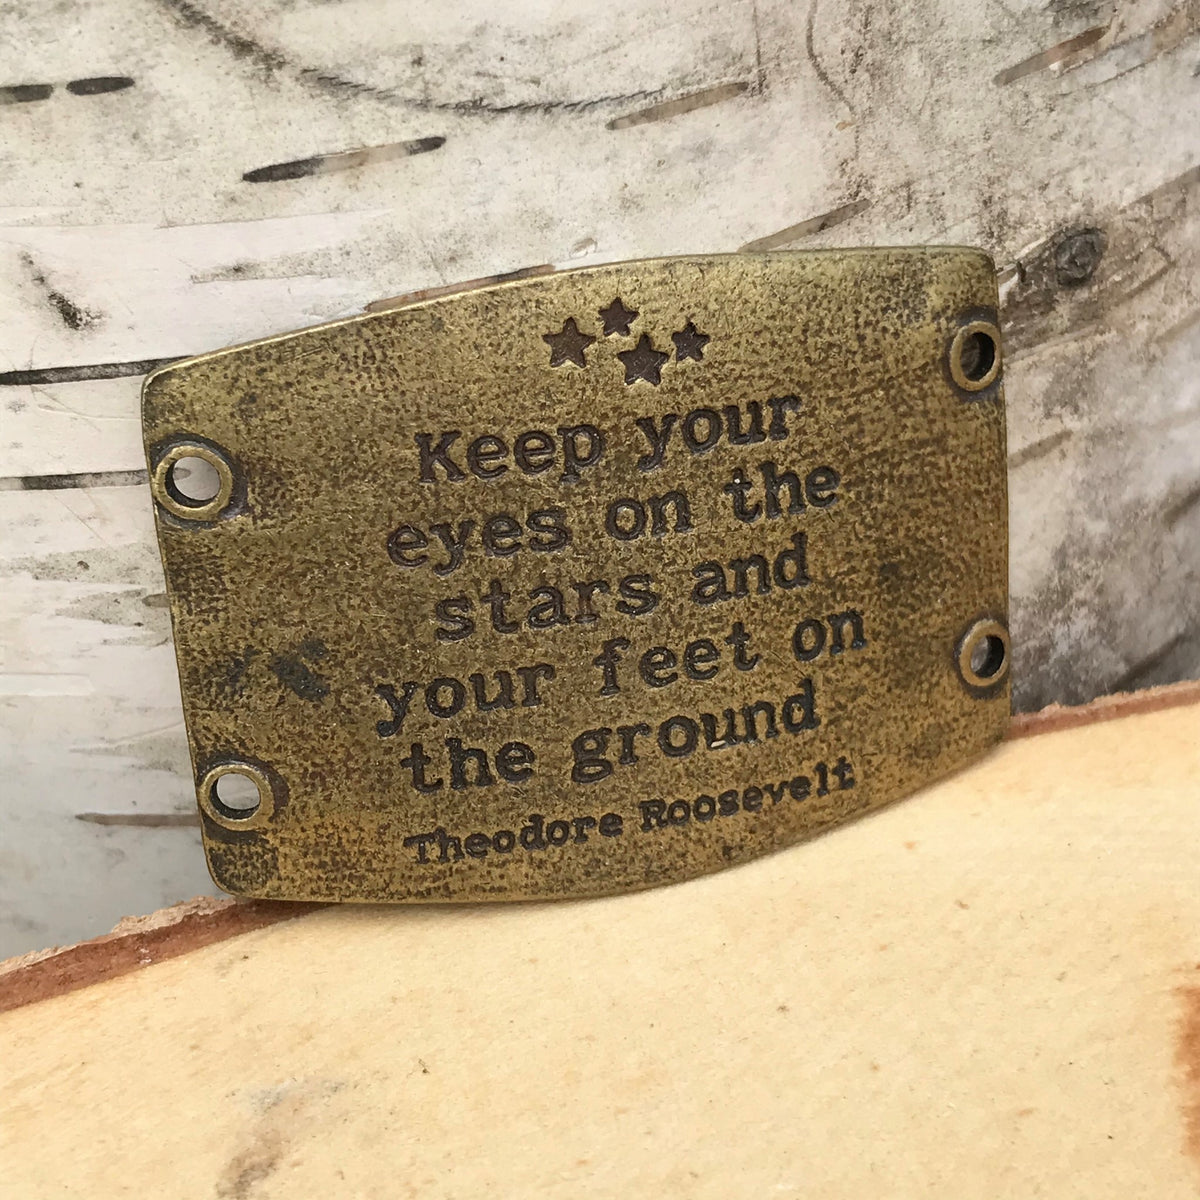 Antique brass finish Lenny & Eva bracelet sentiment that reads, "Keep your eyes on the stars and your feet on the ground." Quote by Theodore Roosevelt. Design of stars above the quote.